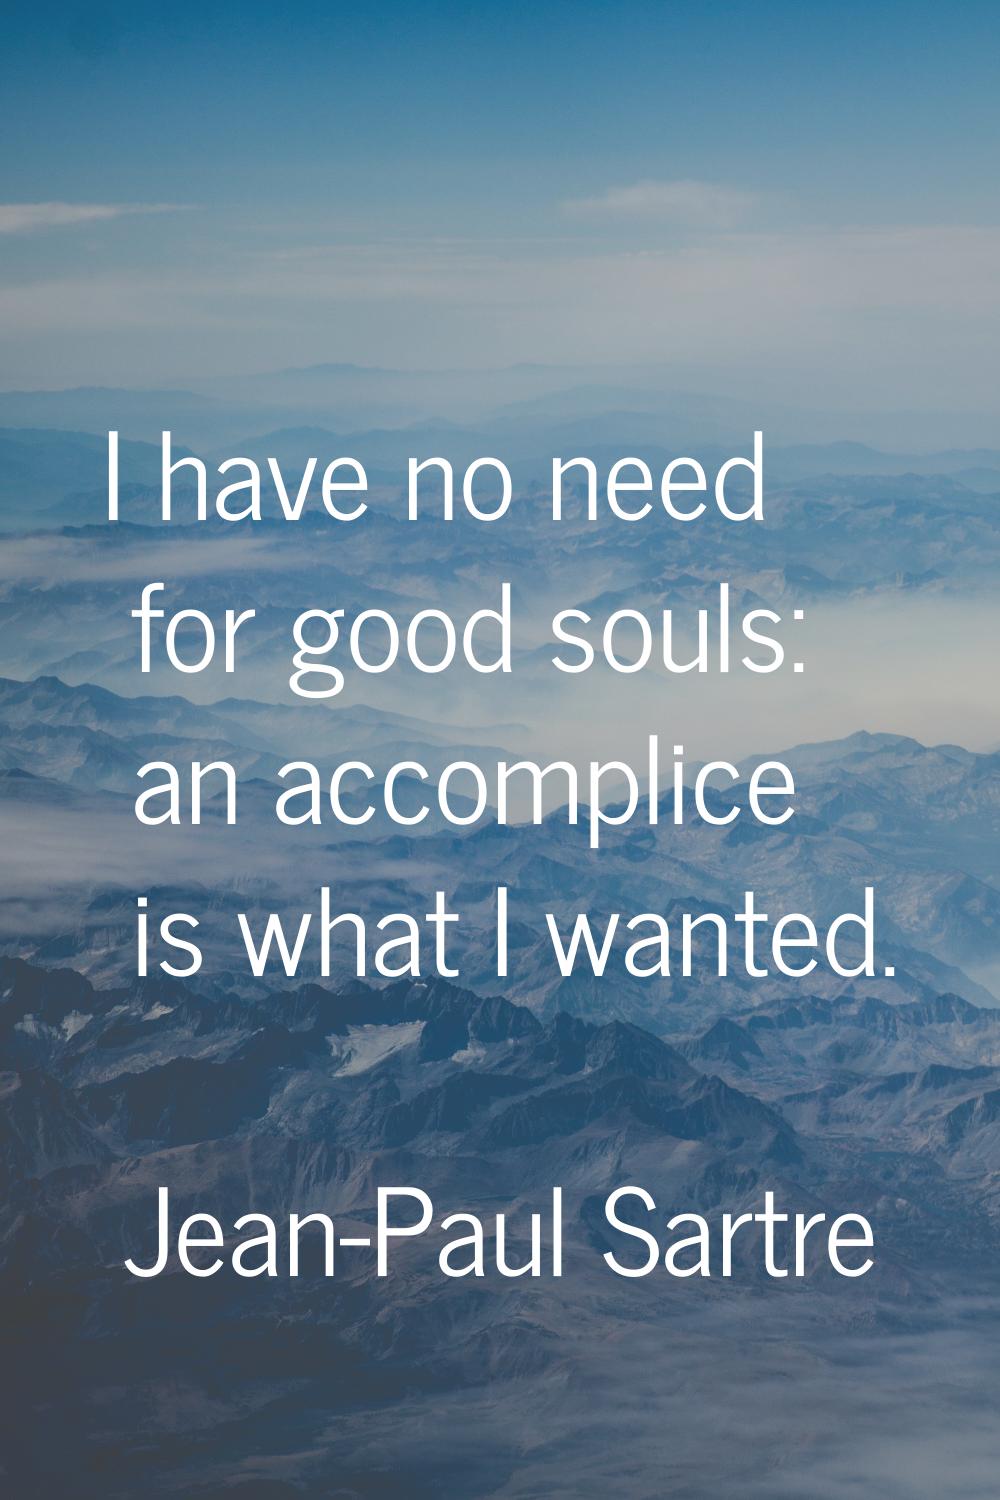 I have no need for good souls: an accomplice is what I wanted.